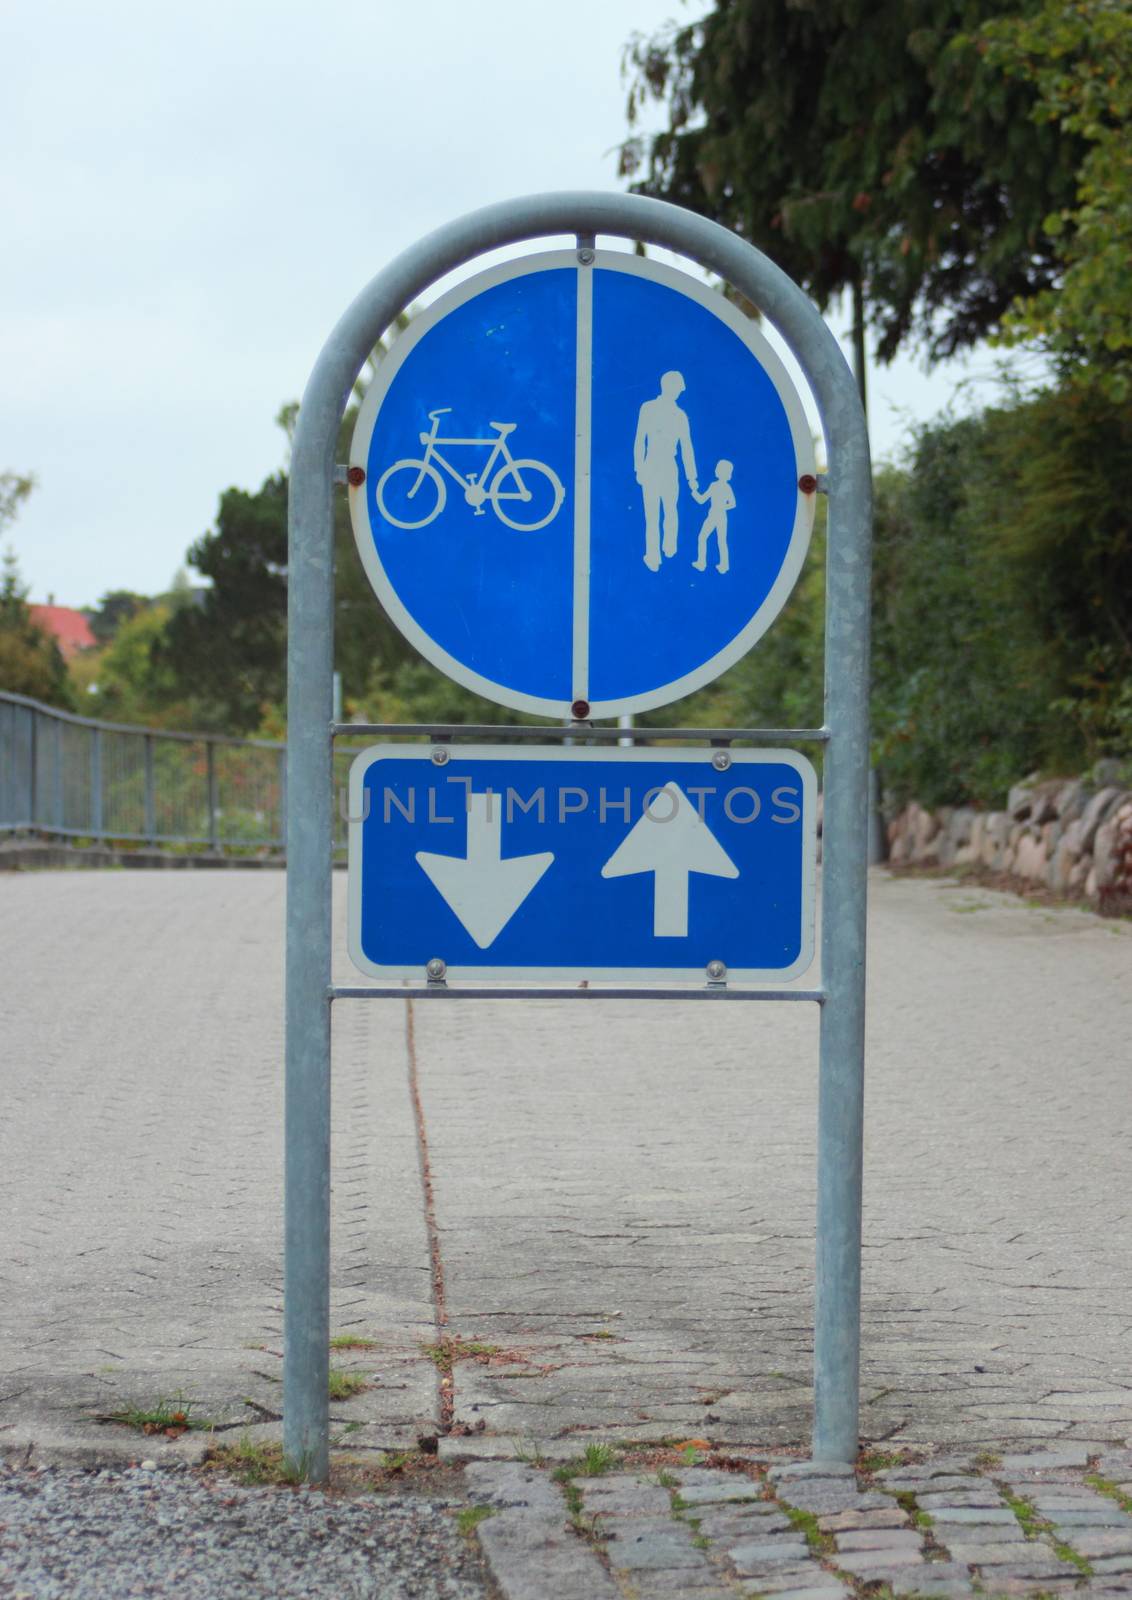 Sign to separate promenade and biking area with two way arrow